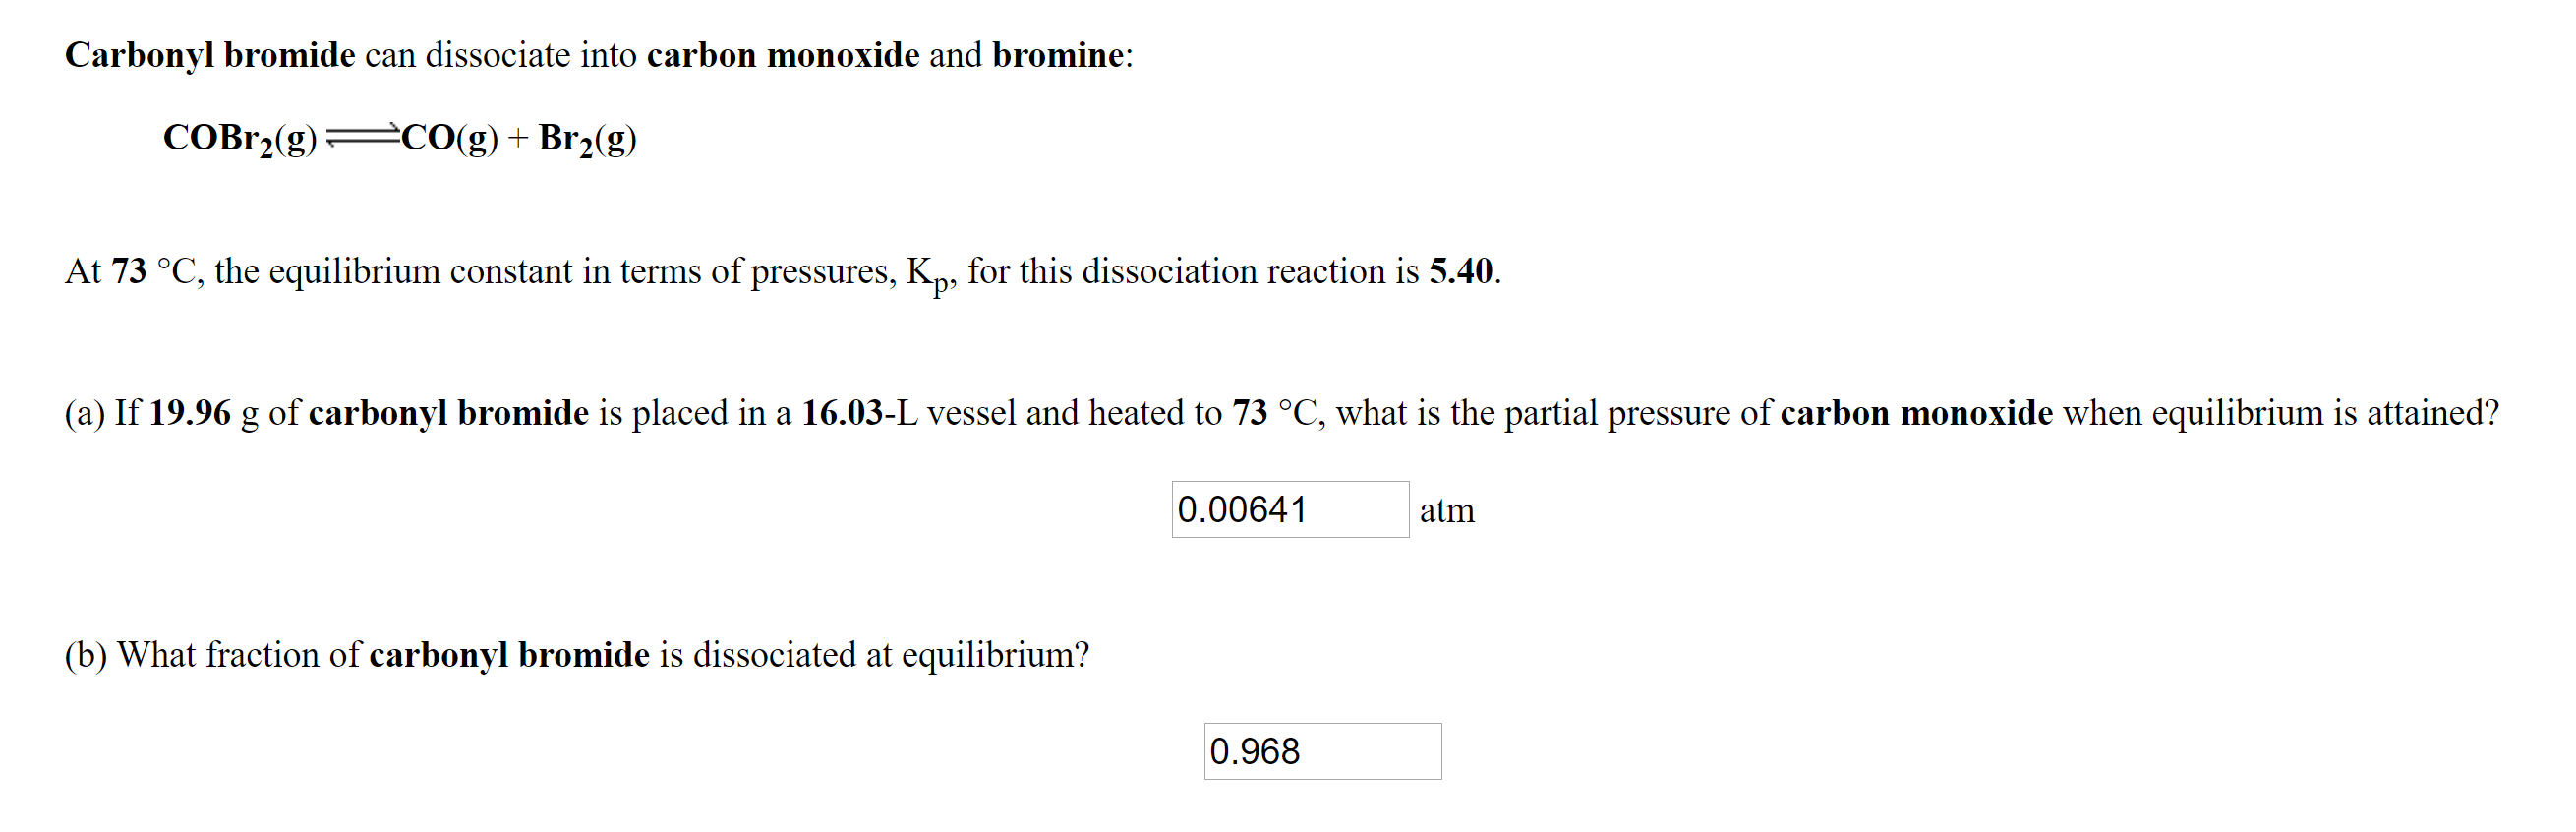 Carbonyl bromide can dissociate into carbon monoxide and bromine:
COBr2(g) CO(g) + Br2(g)
At 73 °C, the equilibrium constant in terms of pressures, K, for this dissociation reaction is 5.40.
(a) If 19.96 g of carbonyl bromide is placed in a 16.03-L vessel and heated to 73 °C, what is the partial pressure of carbon monoxide when equilibrium is attained?
0.00641
atm
(b) What fraction of carbonyl bromide is dissociated at equilibrium?
0.968
